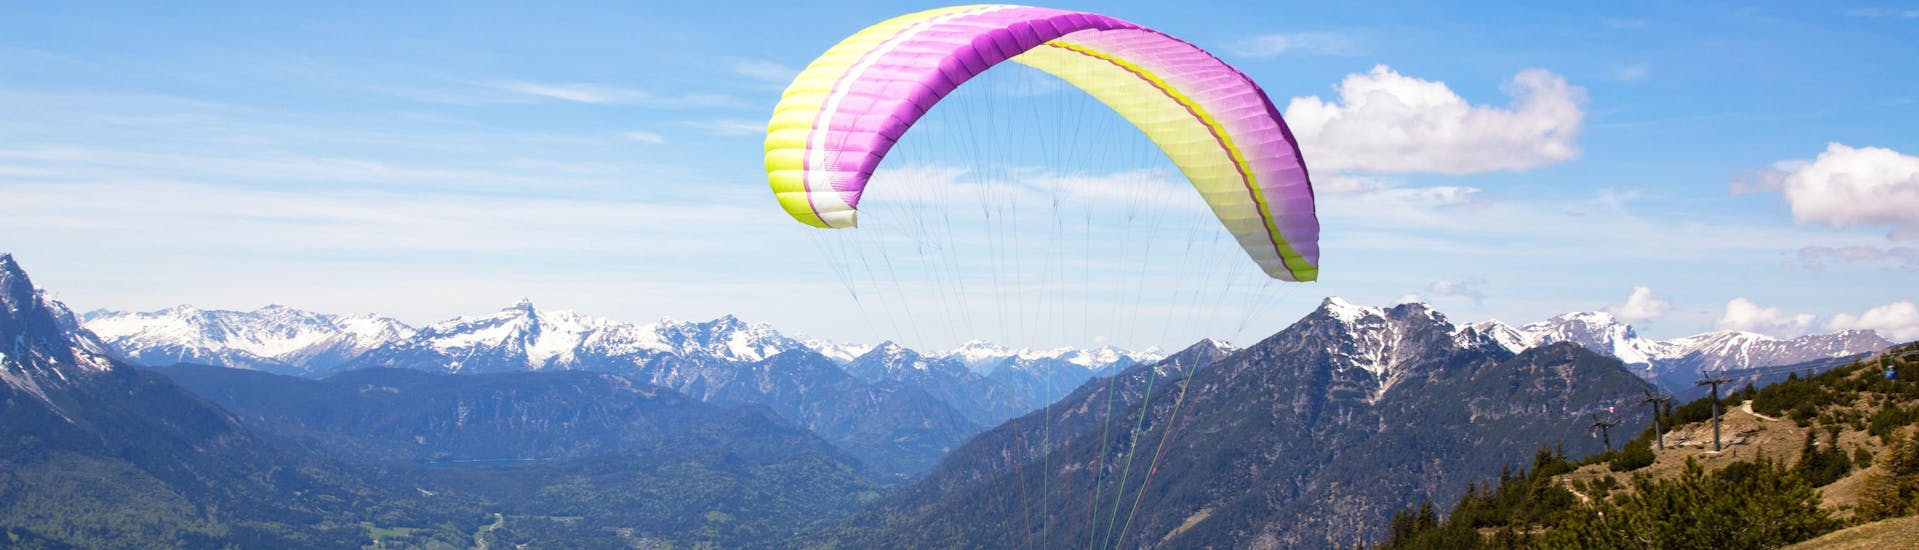 A tandem master and his passenger are sailing through cloudy skies while paragliding in Garmisch-Partenkirchen.